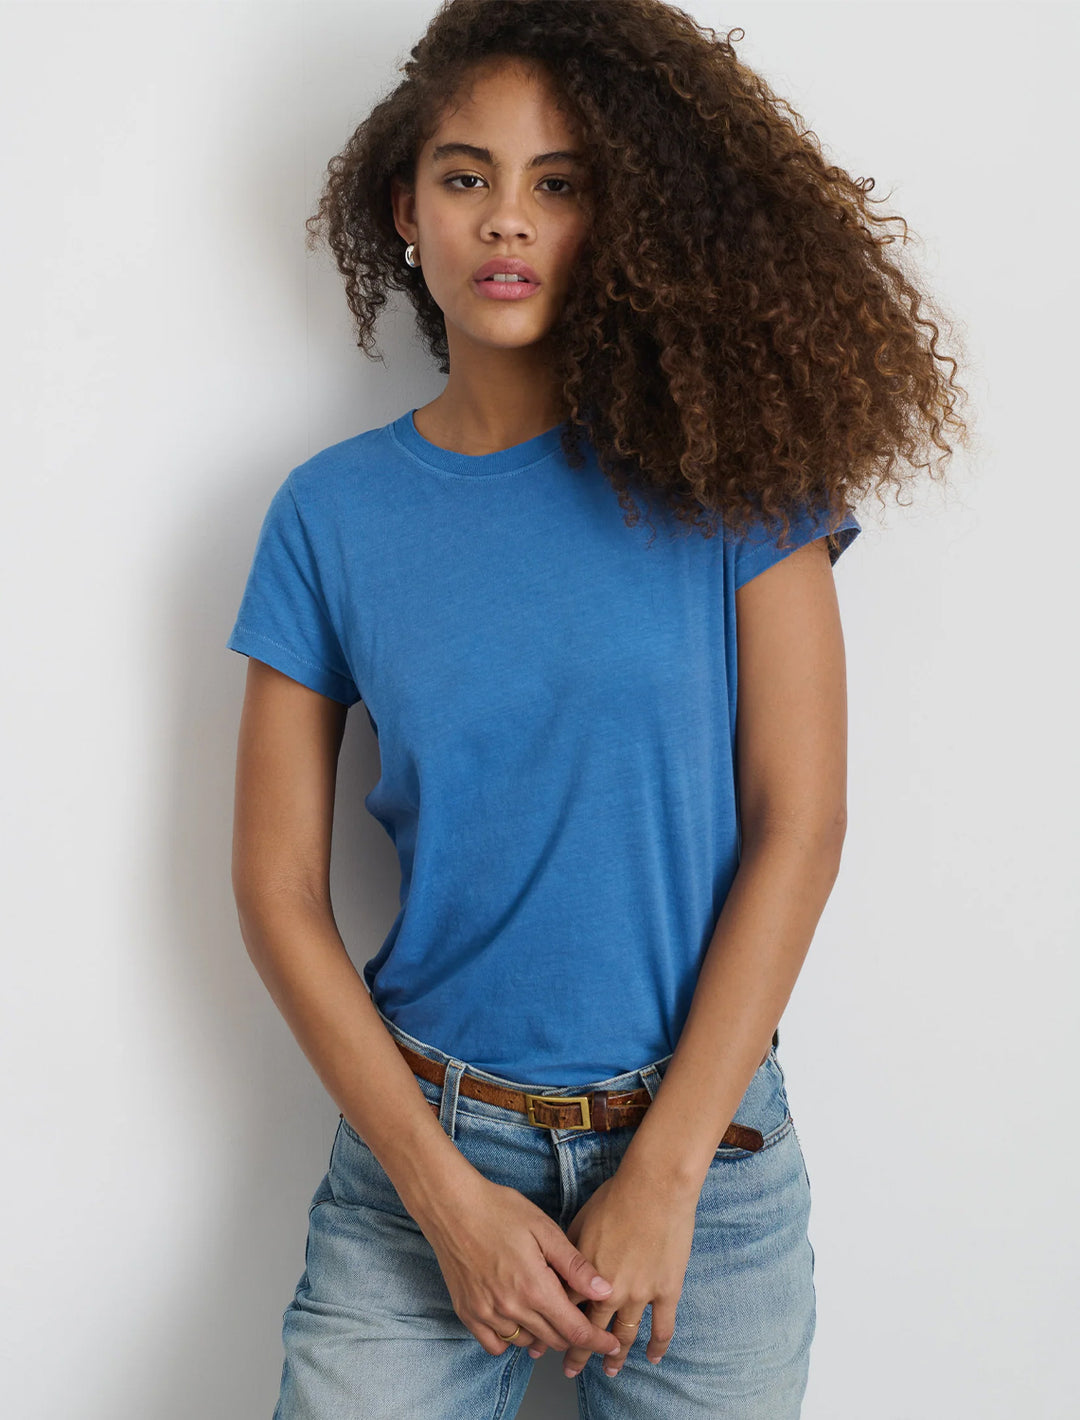 Model wearing Alex Mill's prospect tee in washed cobalt.